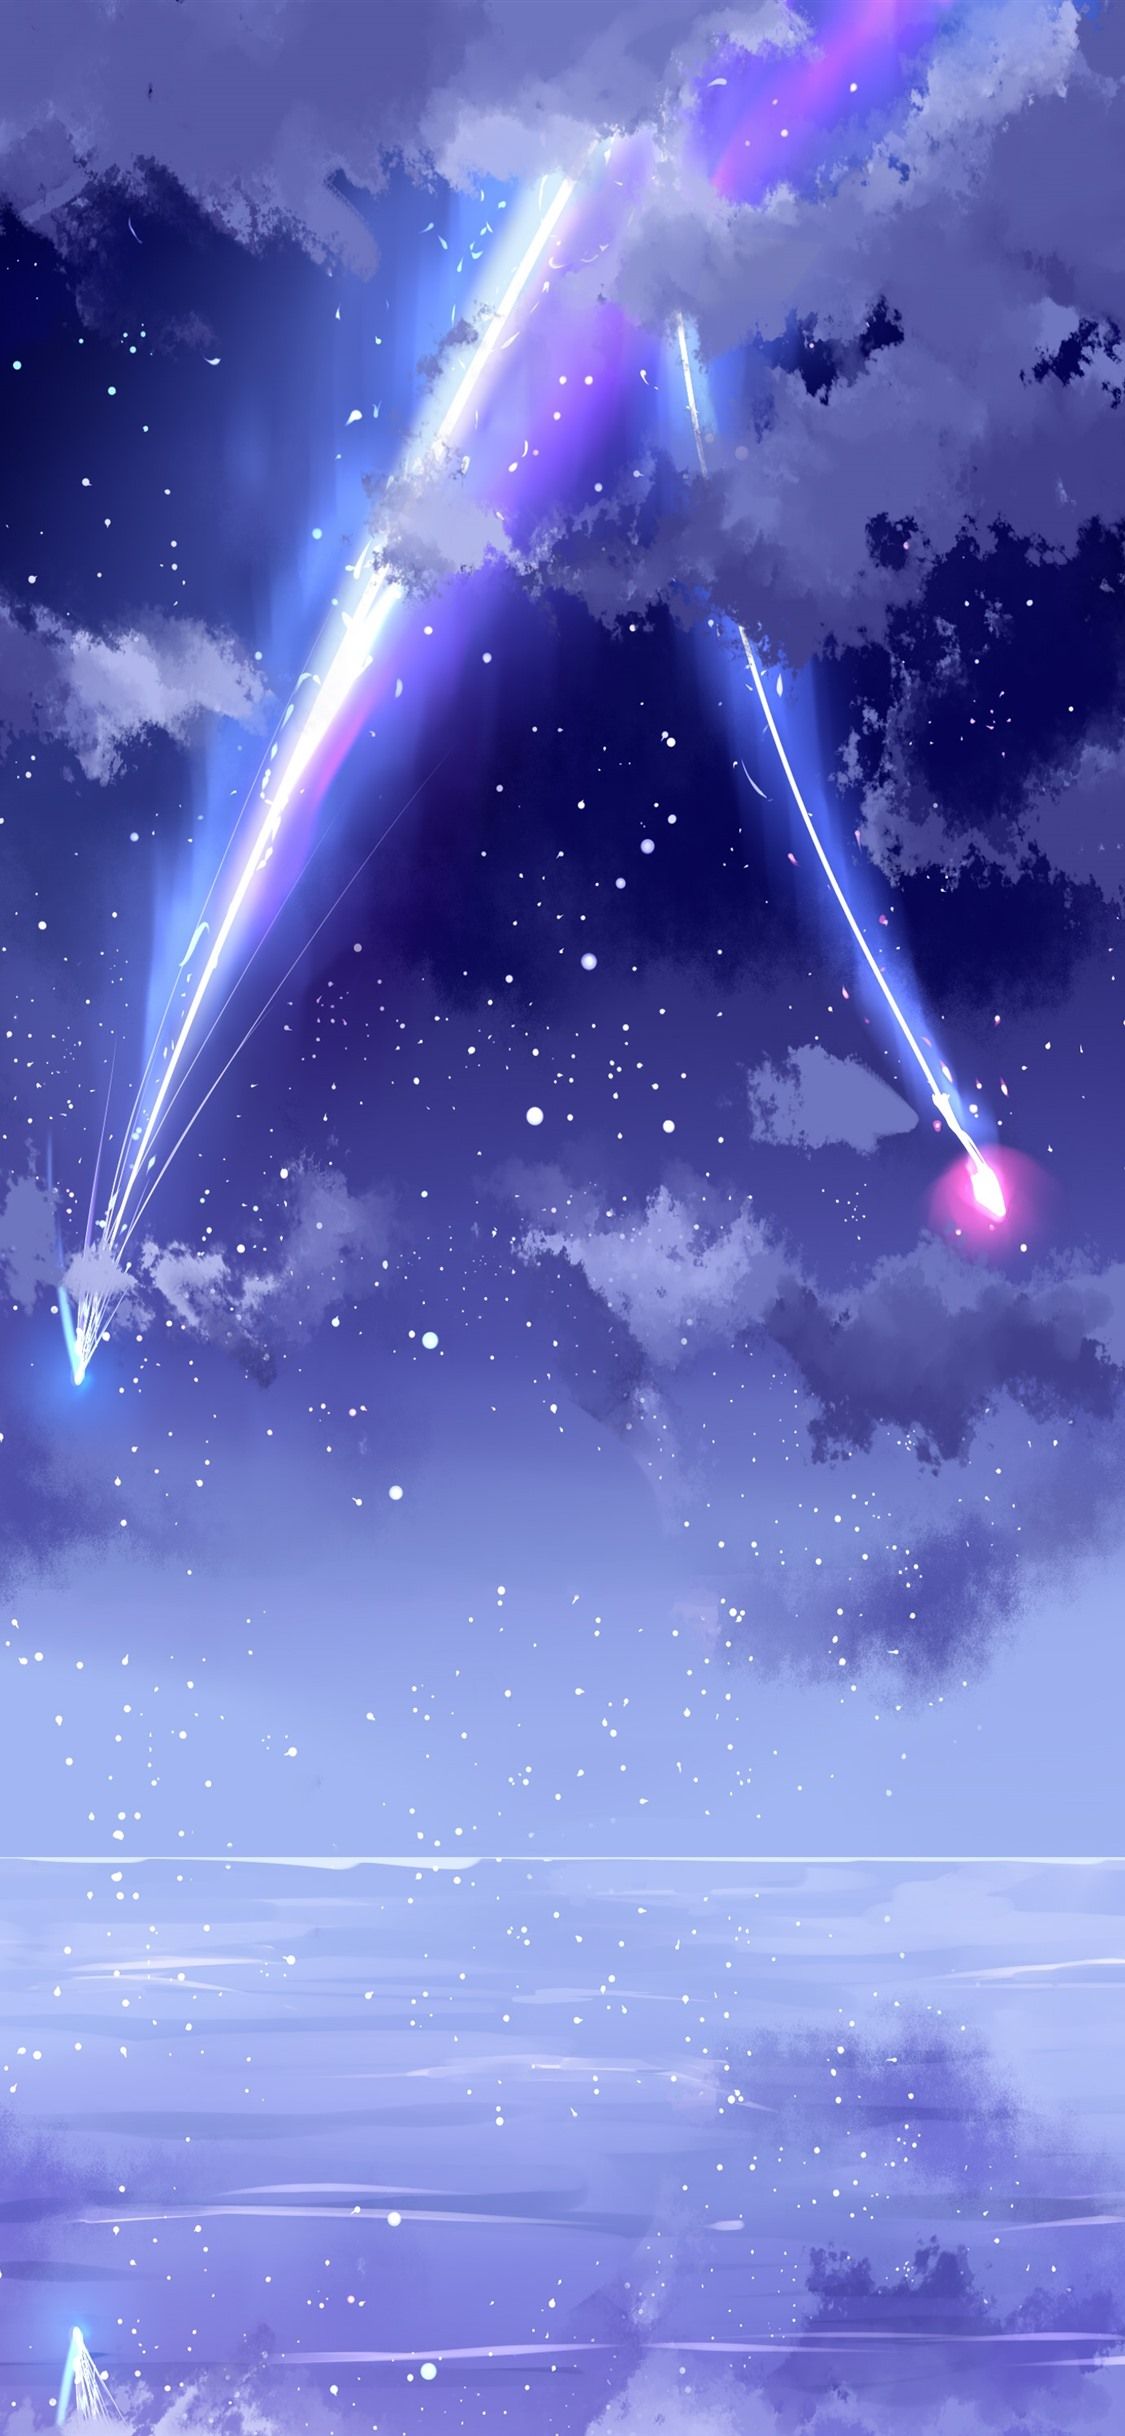 Your Name Anime Wallpaper iPhone Wallpaper & Background Download